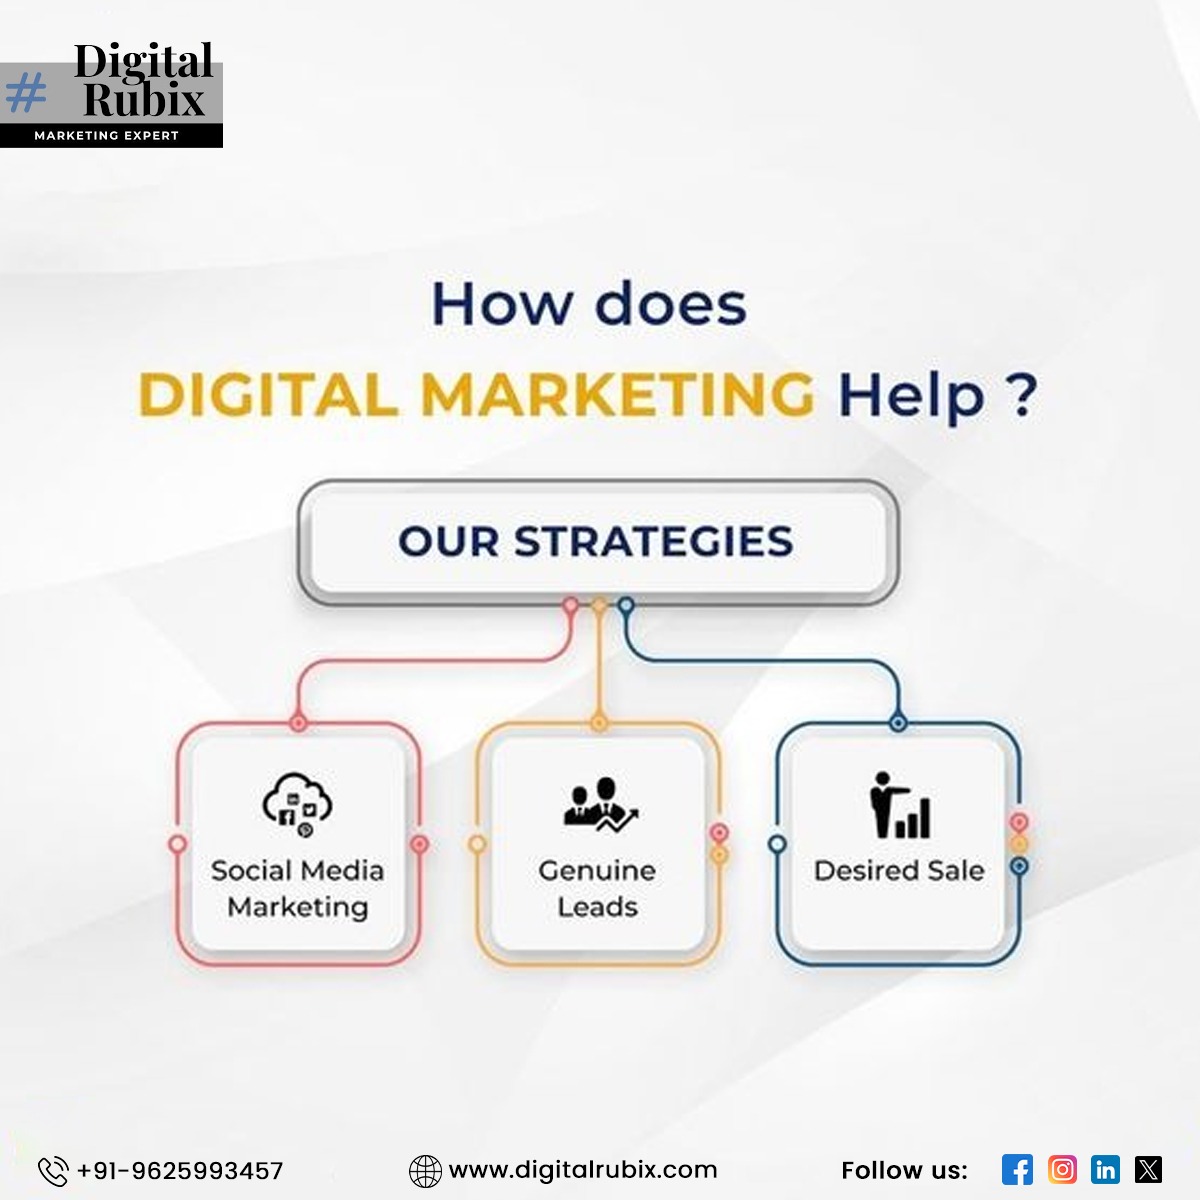 Transform Your Business with Digital Rubix - Your Ultimate Marketing Partner! Our Strategies Fuel Social Media Engagement, Deliver Genuine Leads, and Drive Desired Sales.
Reach out at +91-9625993457 or visit digitalrubix.com 
#DigitalRubix #MarketingExpert #DesiredSales